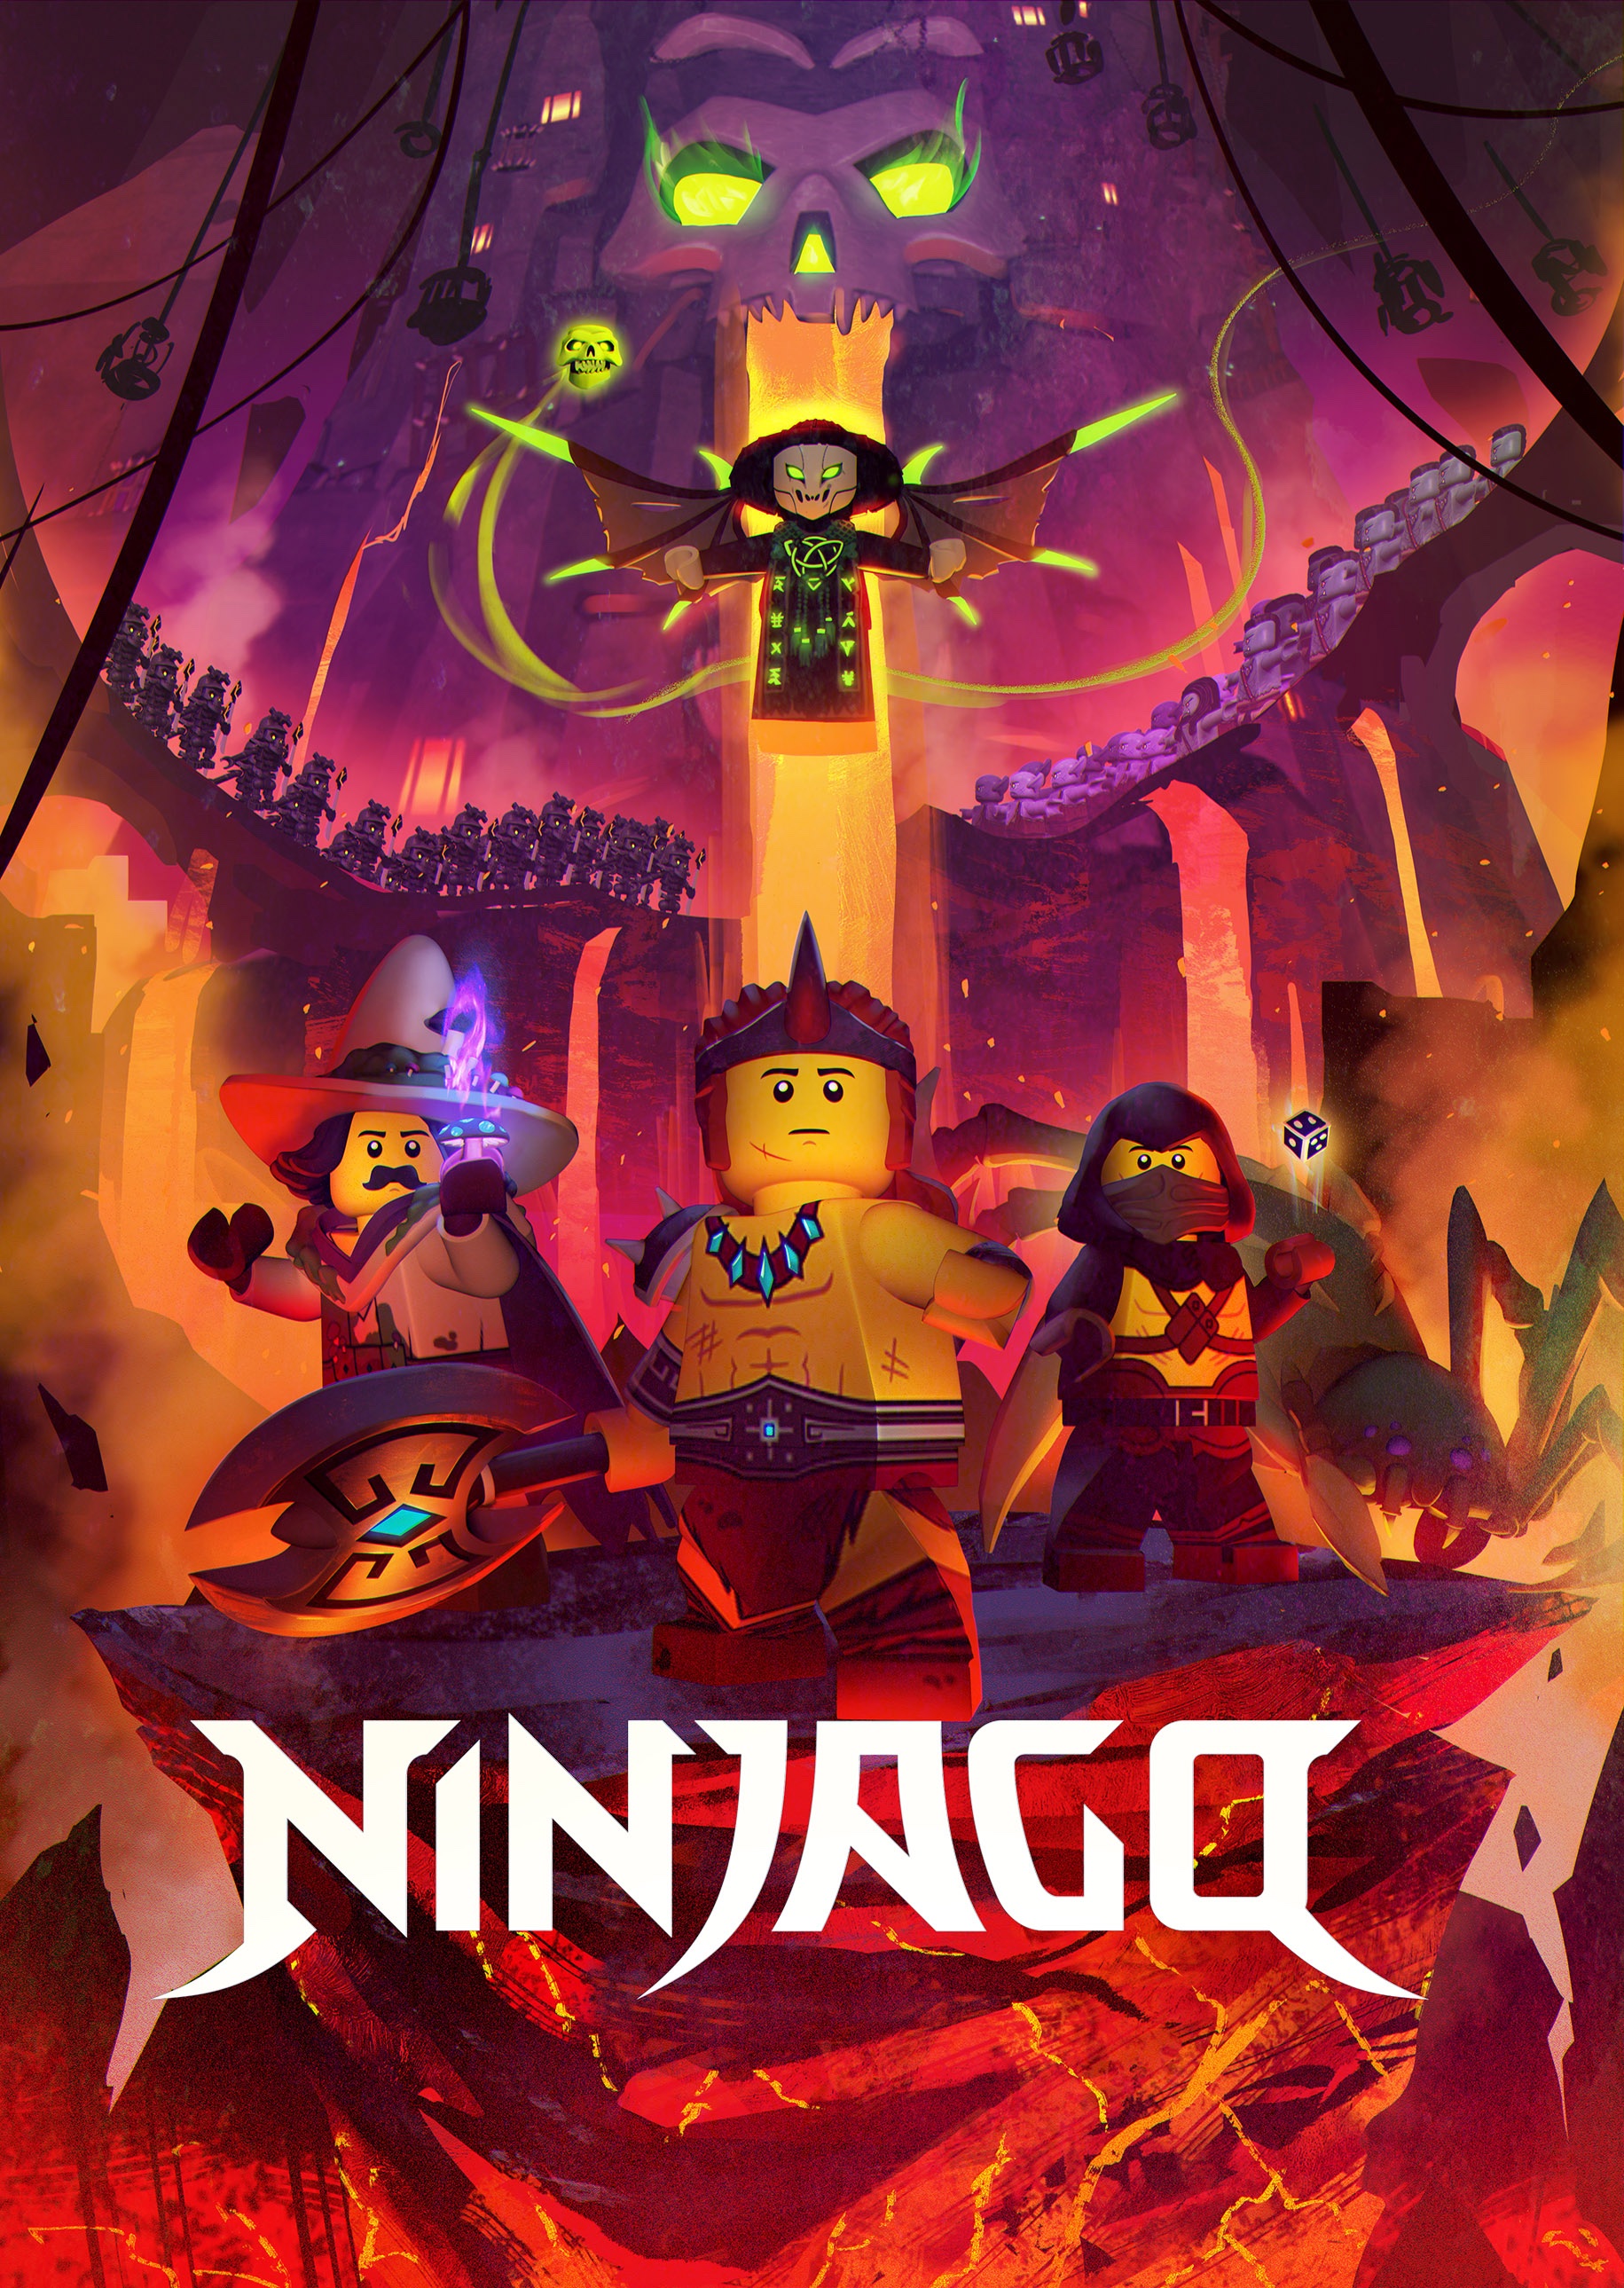 Isse Forfatter syg Lego Ninjago March Of The Oni Poster Discount Store, Save 54% |  jlcatj.gob.mx